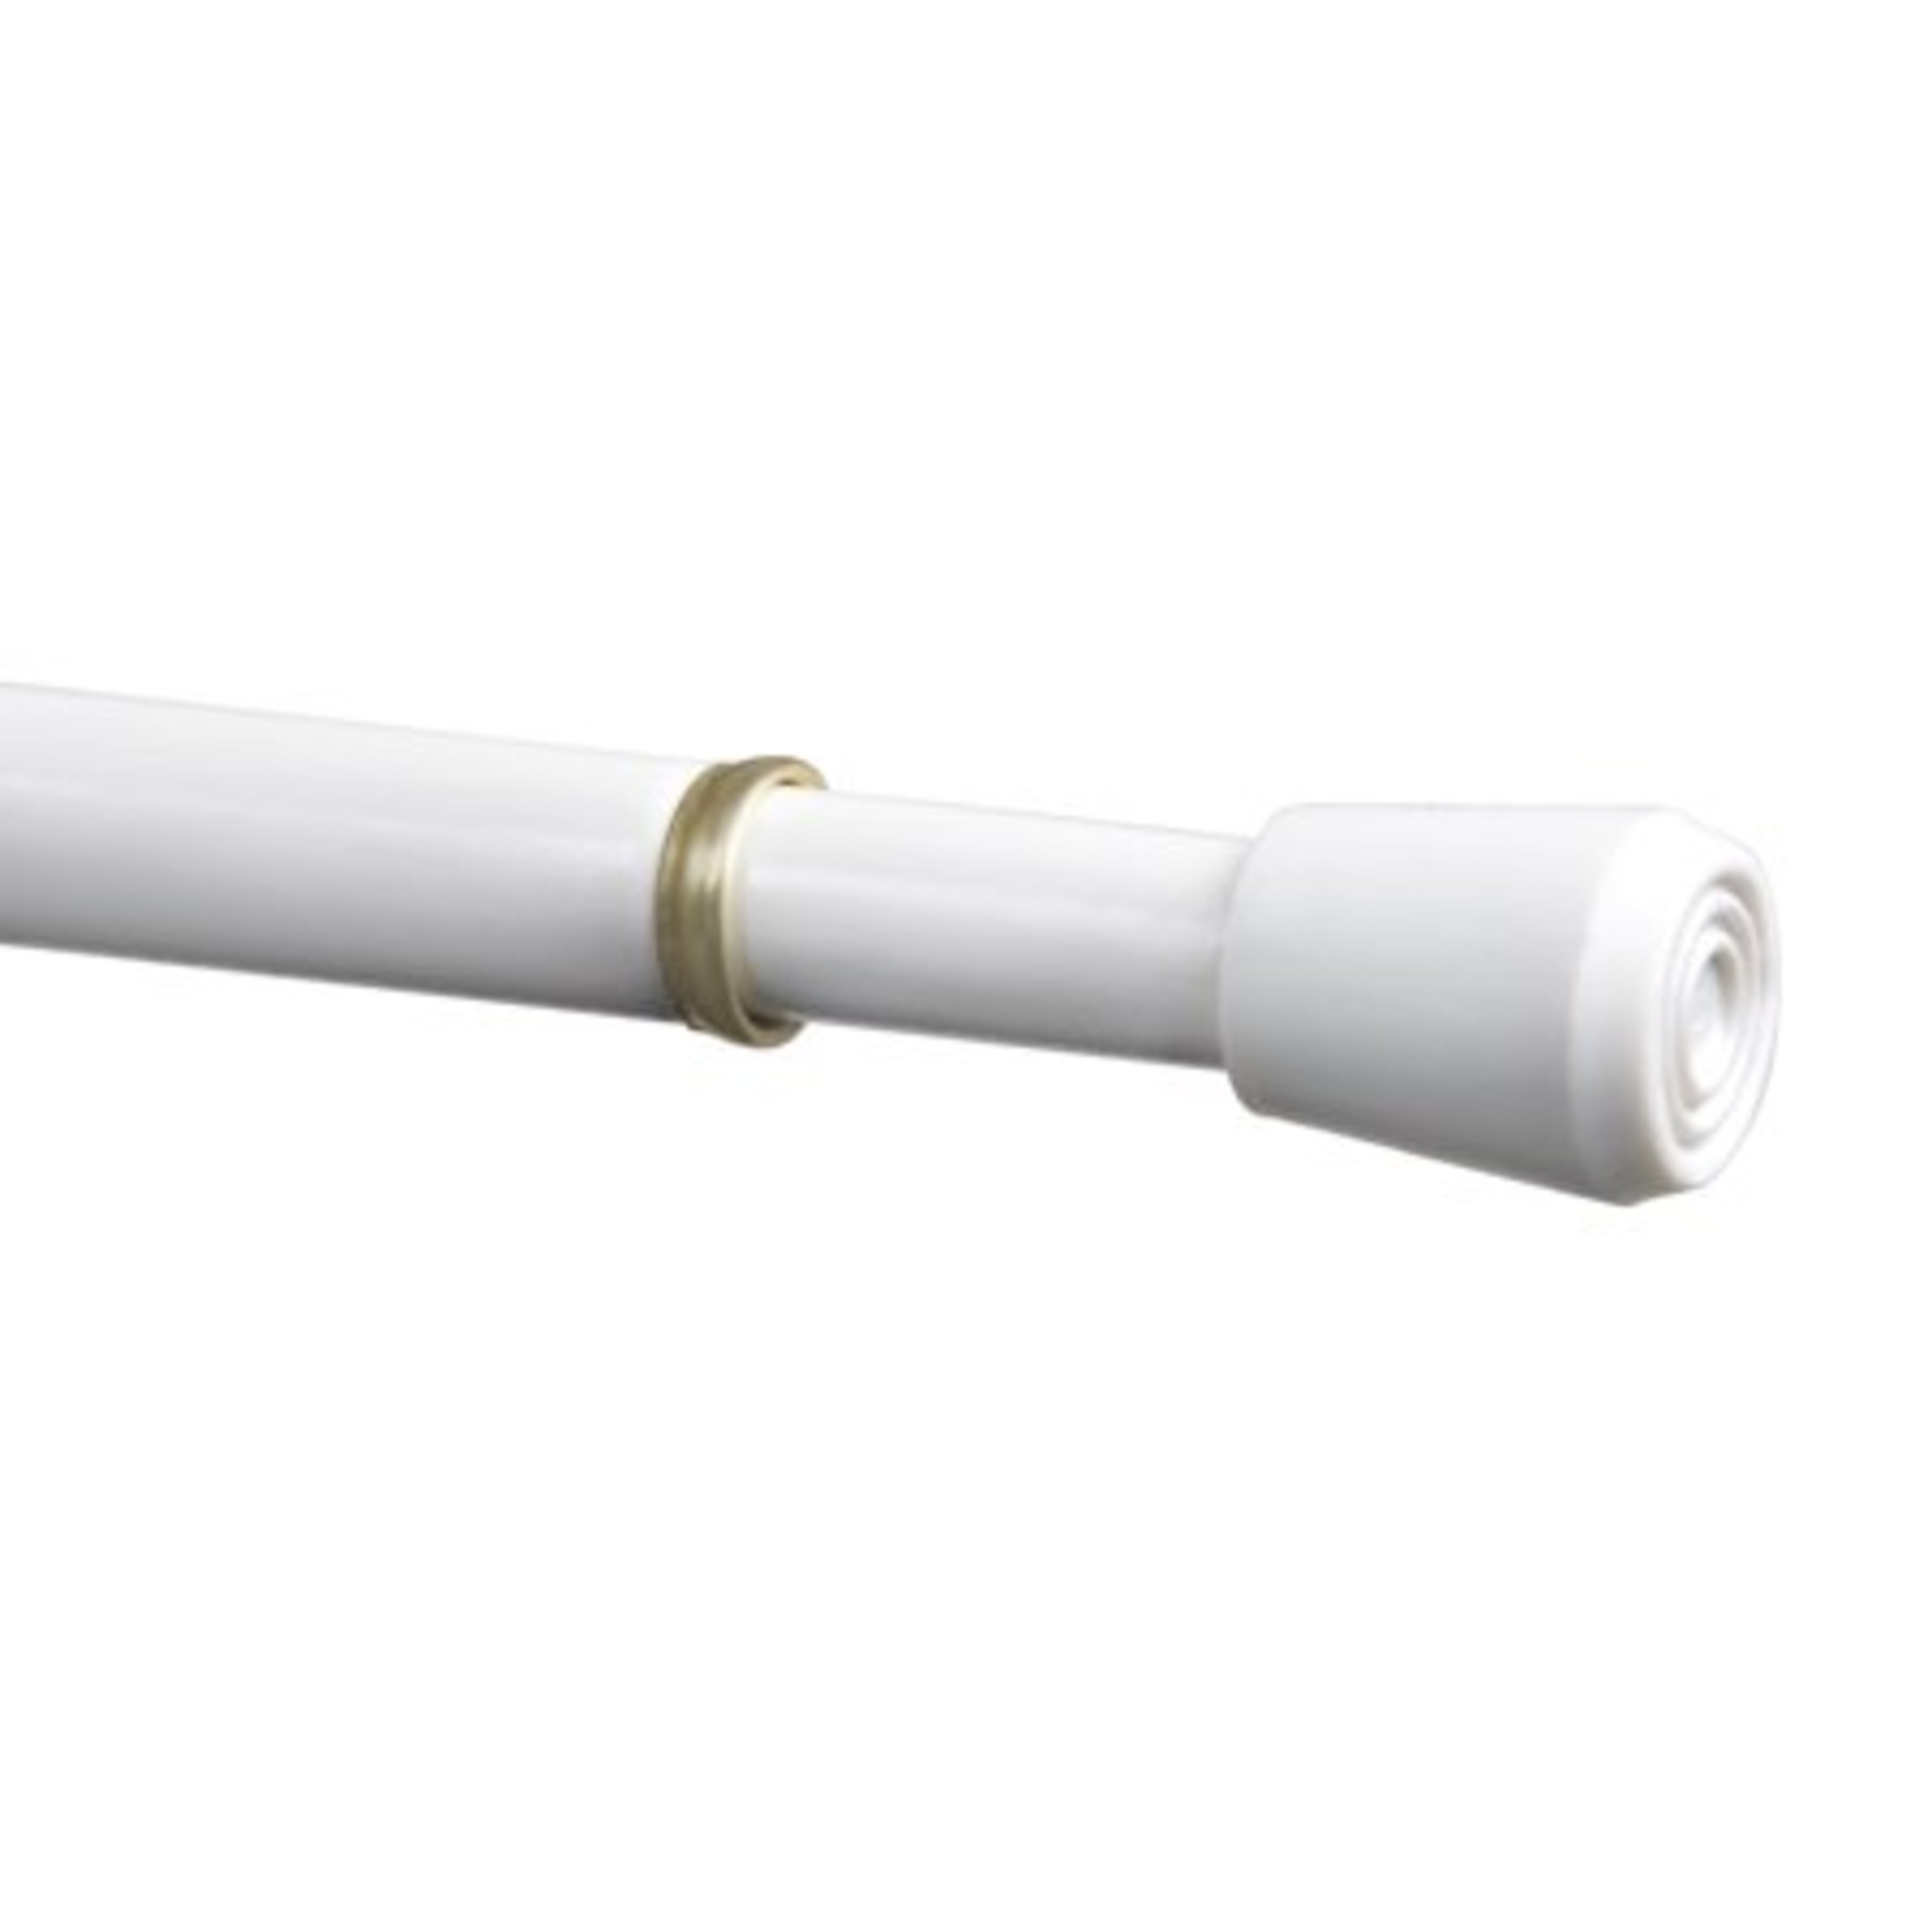 Mainstays 18-28 in. Adjustable Spring Tension Curtain Rod, 7/16 in. Diameter Steel Tube, White Finish - image 1 of 6